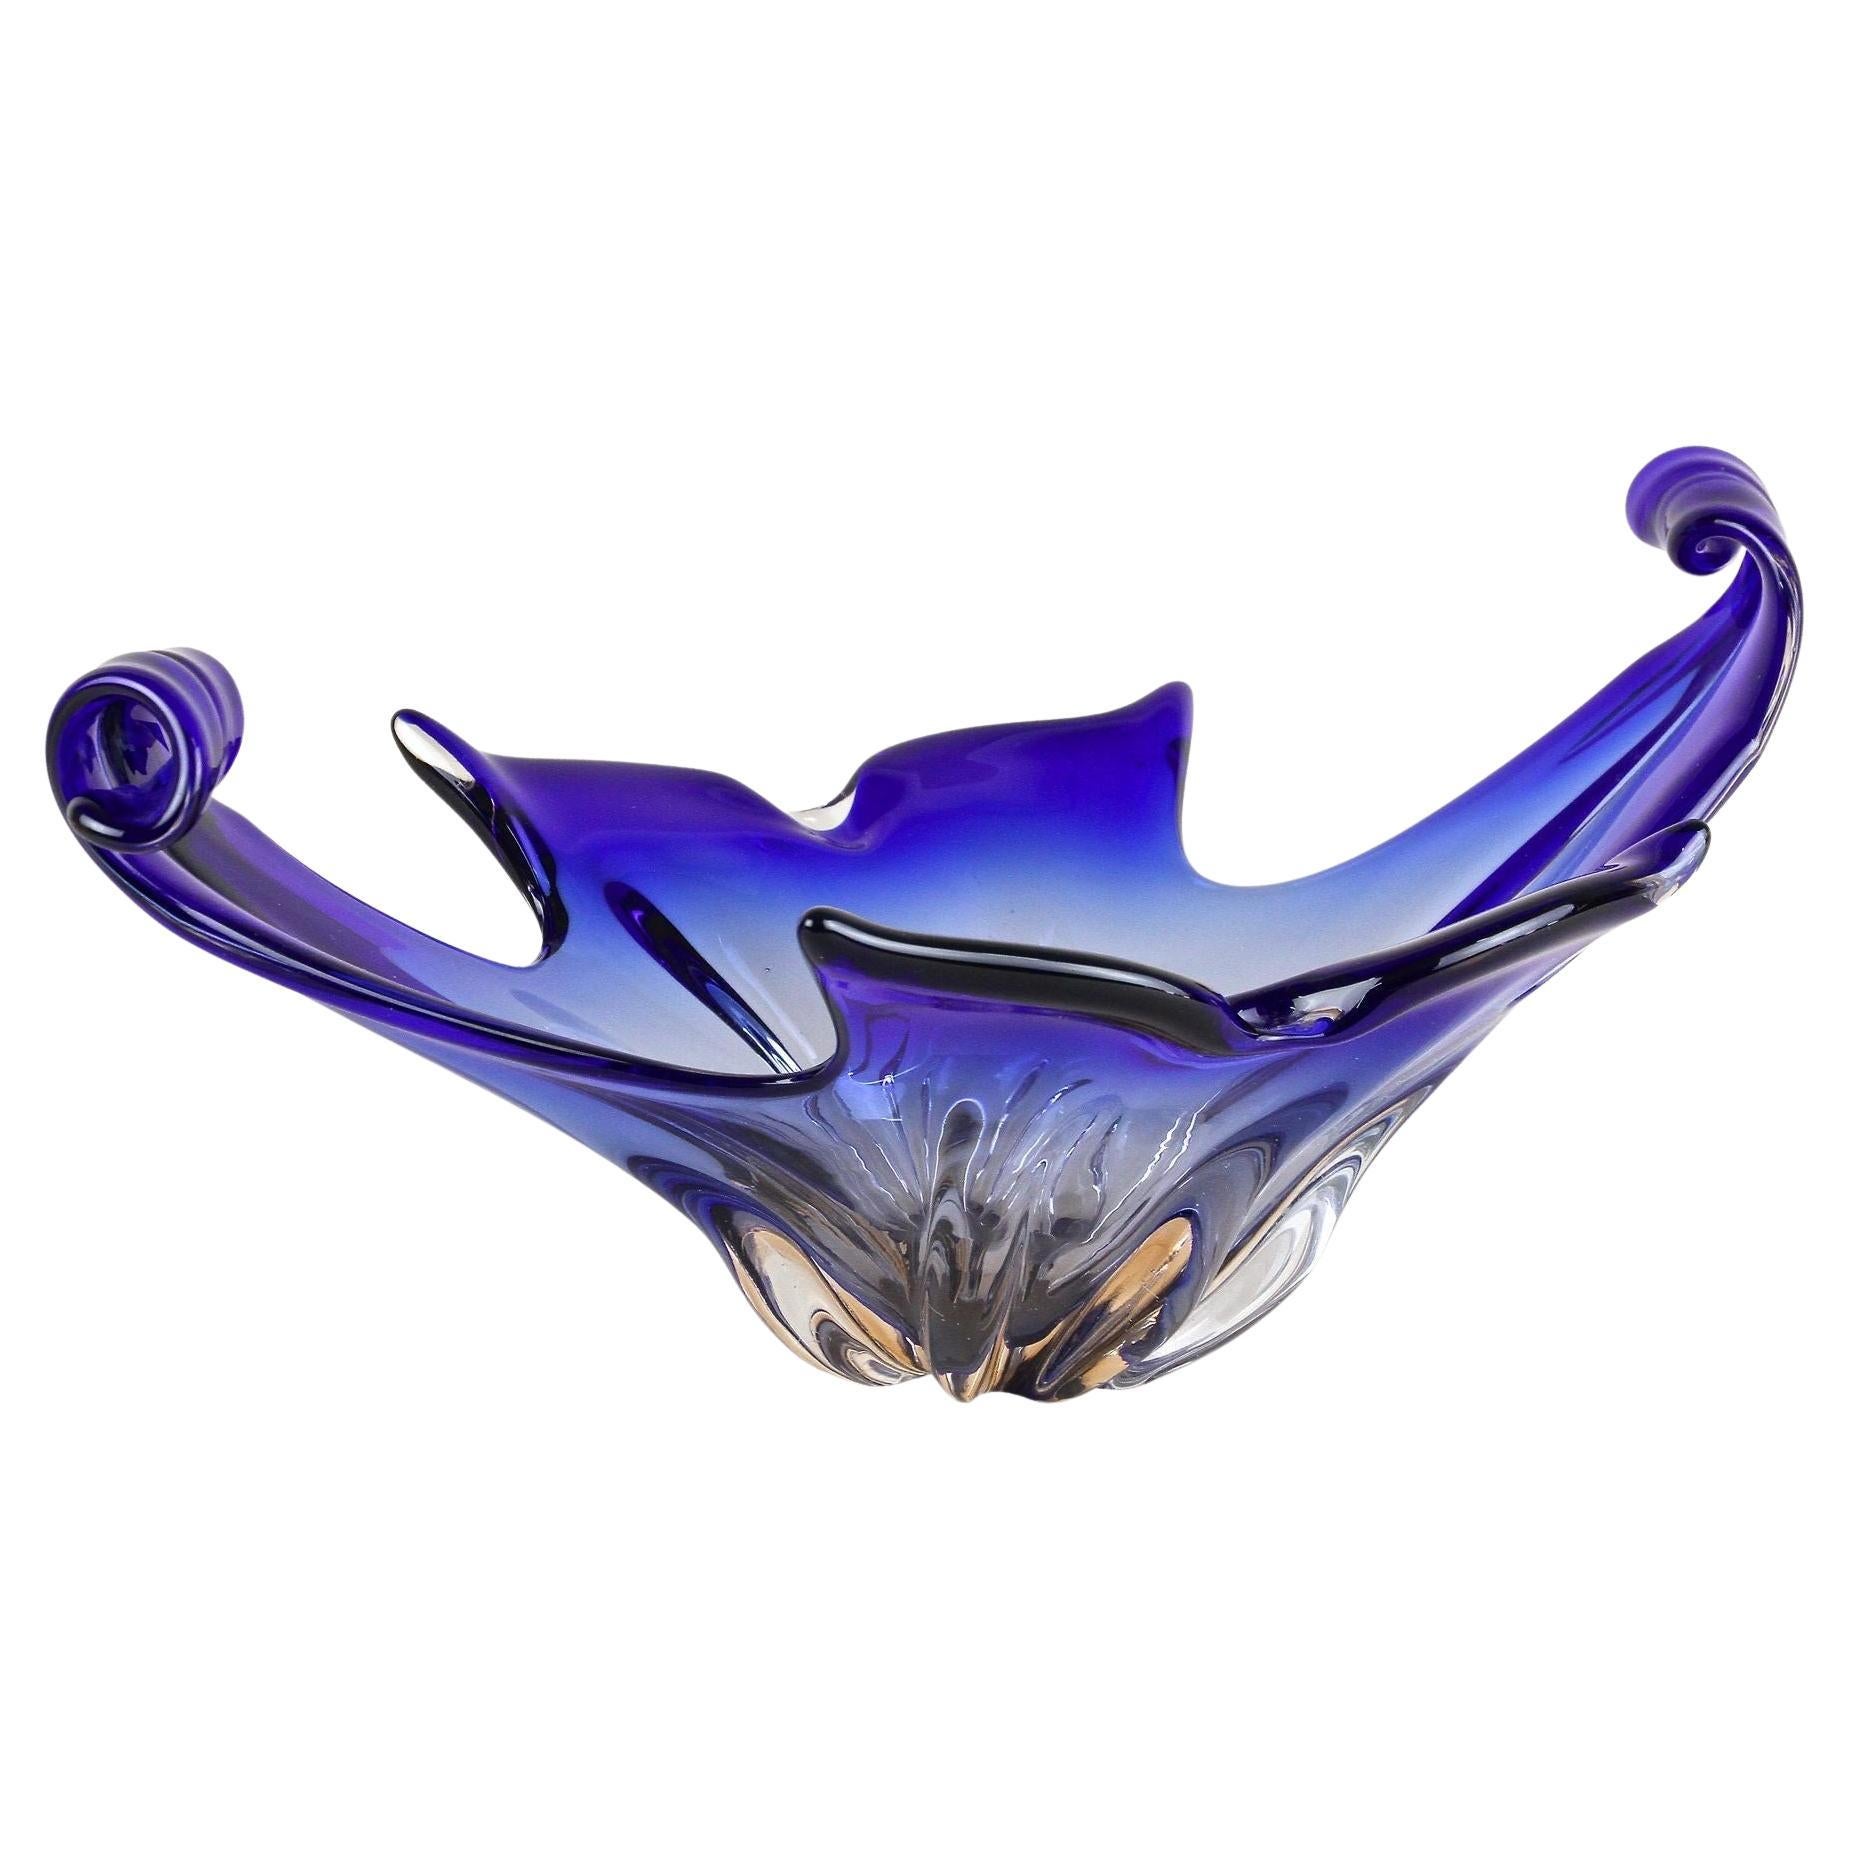 Blue Murano Glass Bowl - Mid-Century Modern, Italy circa 1960/70 For Sale